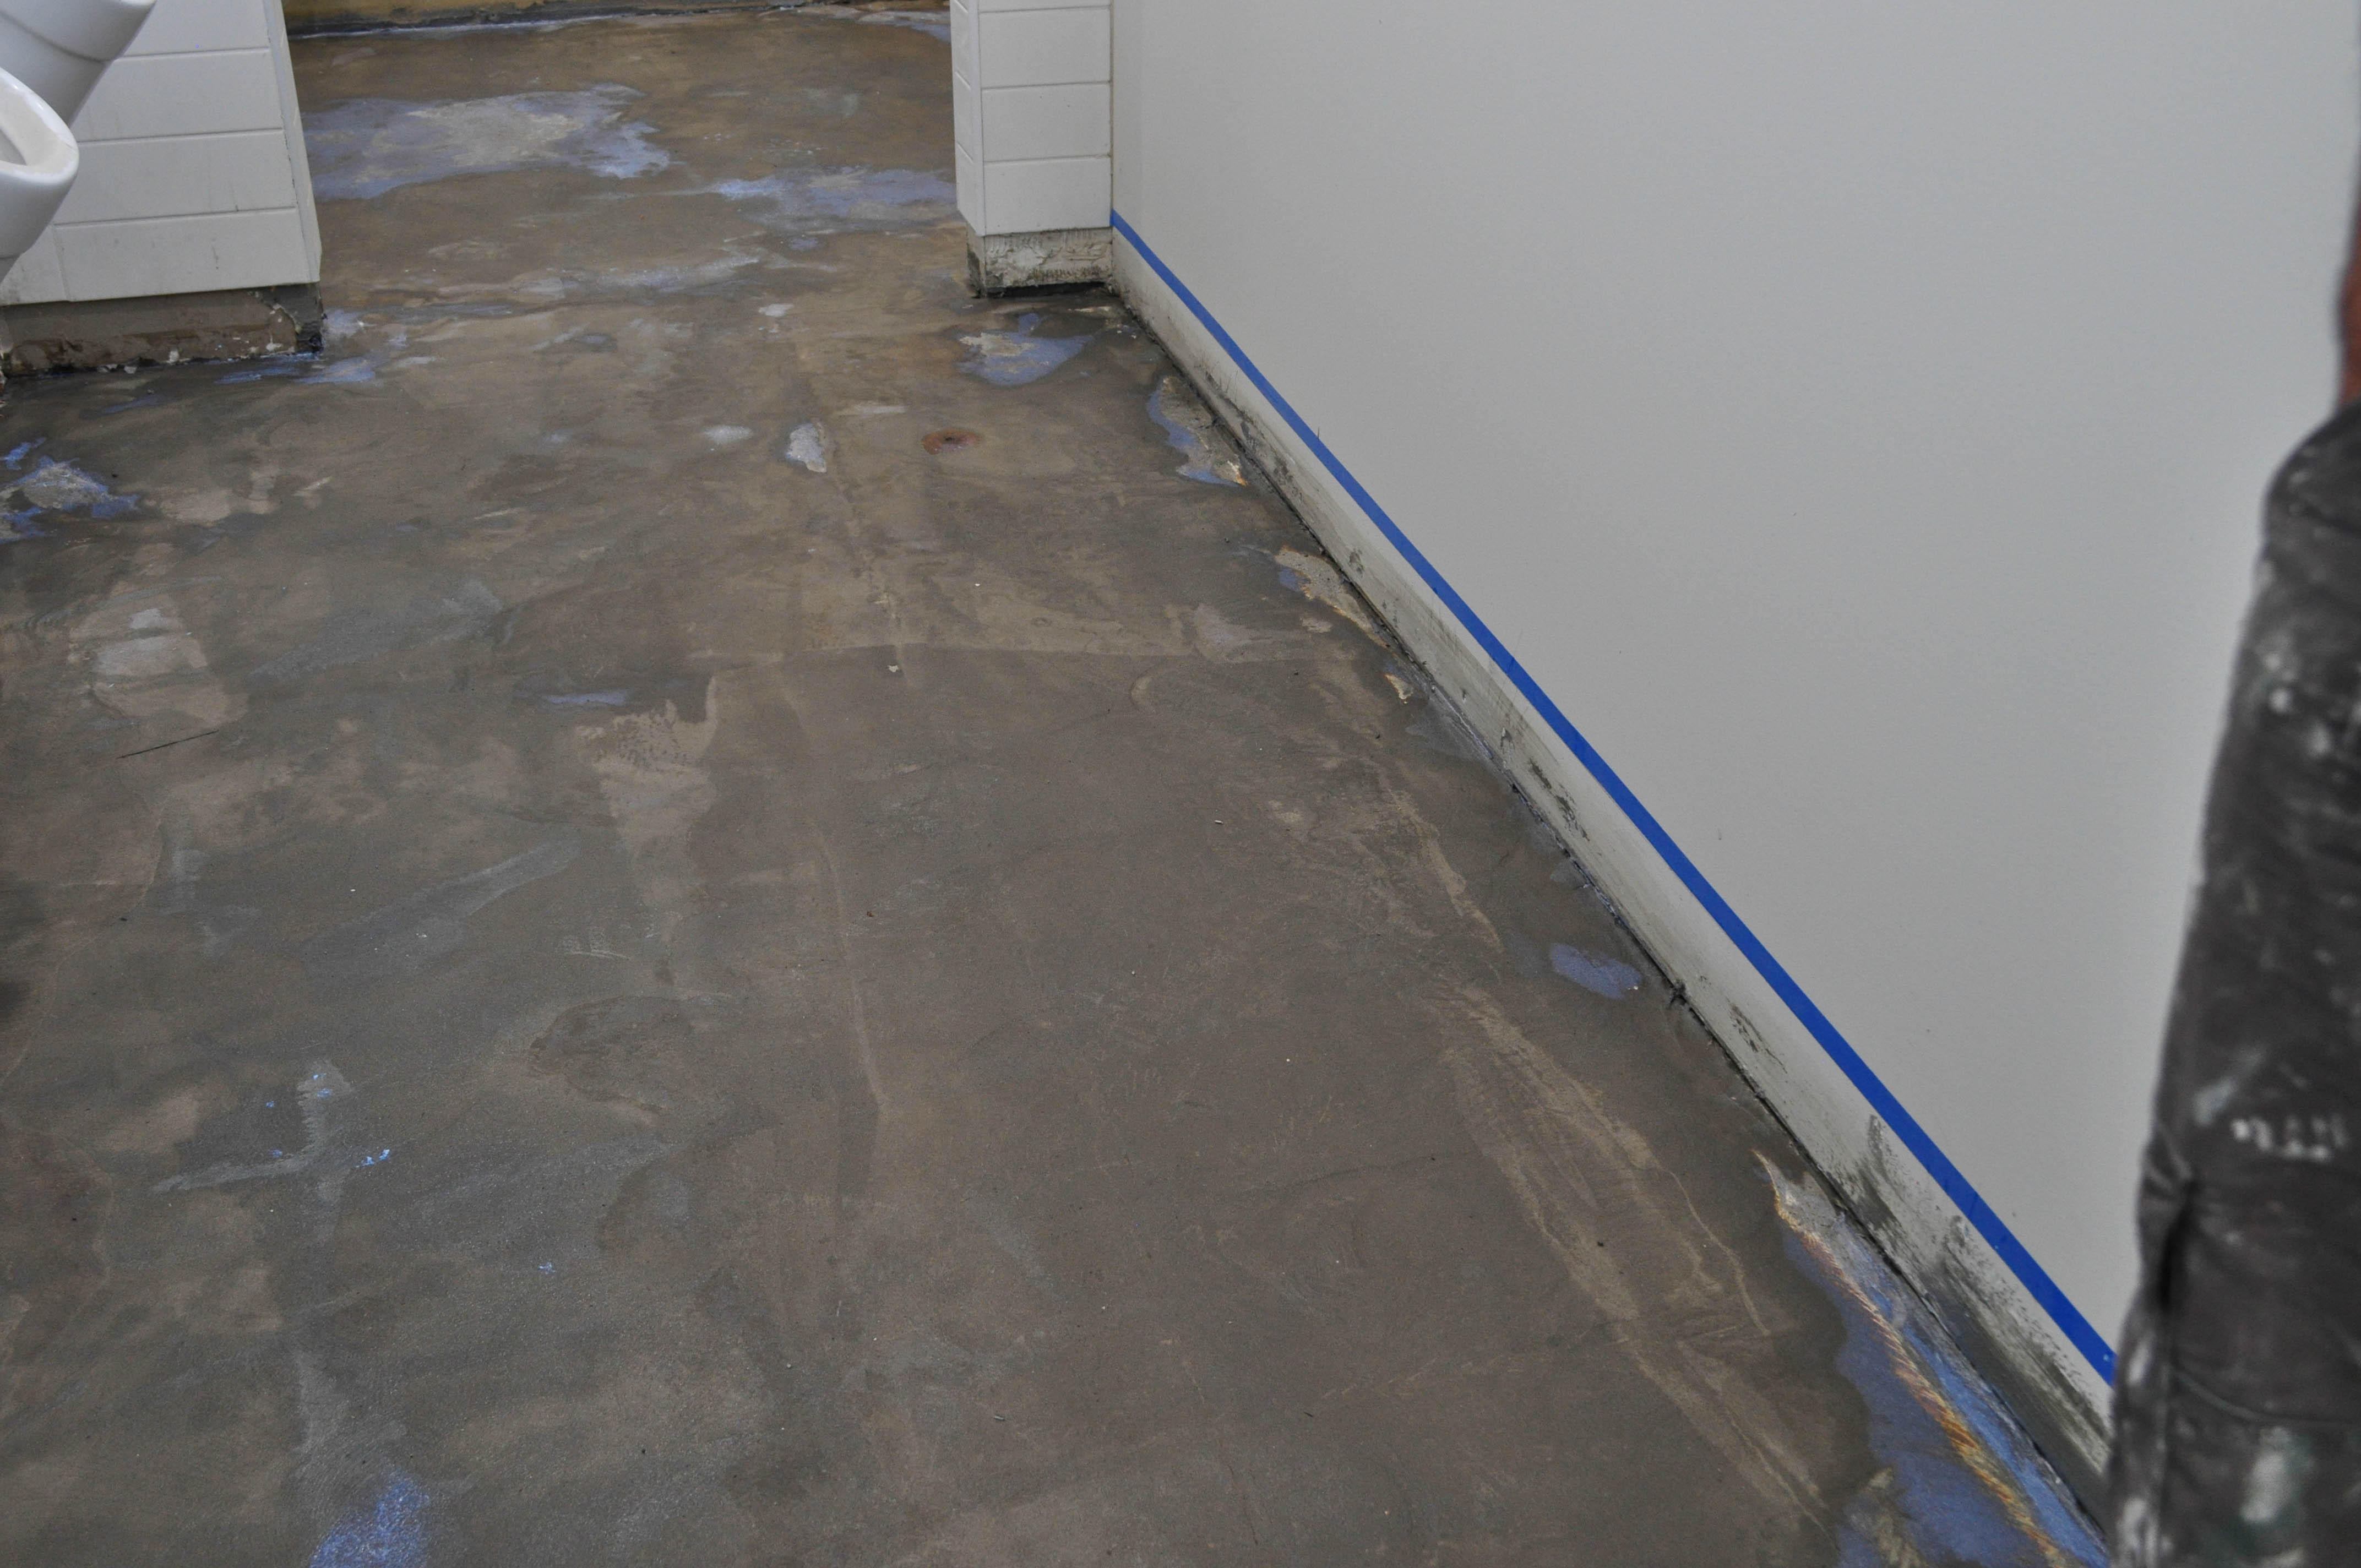 showing a room with a newly prepared toilet floor with floor leveller applied and primer liquid spread on it ready for the vinyl installation on top of it.